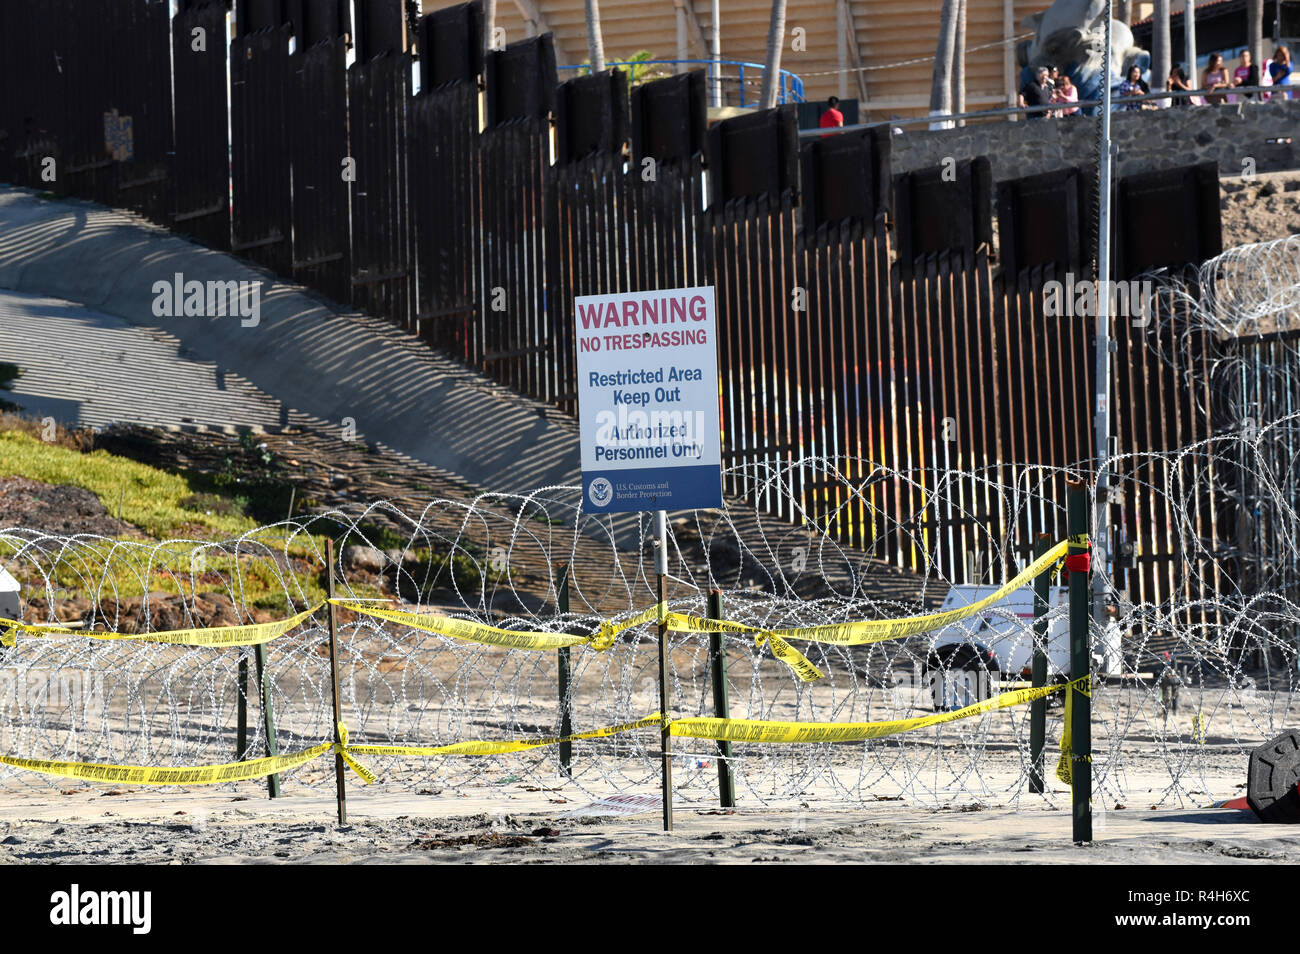 SAN YSIDRO, CALIFORNIA - NOVEMBER 26, 2018: Restricted Area along the USA Mexico Border Wall at Imperial Beach with Tijuana beyond the barrier. Stock Photo